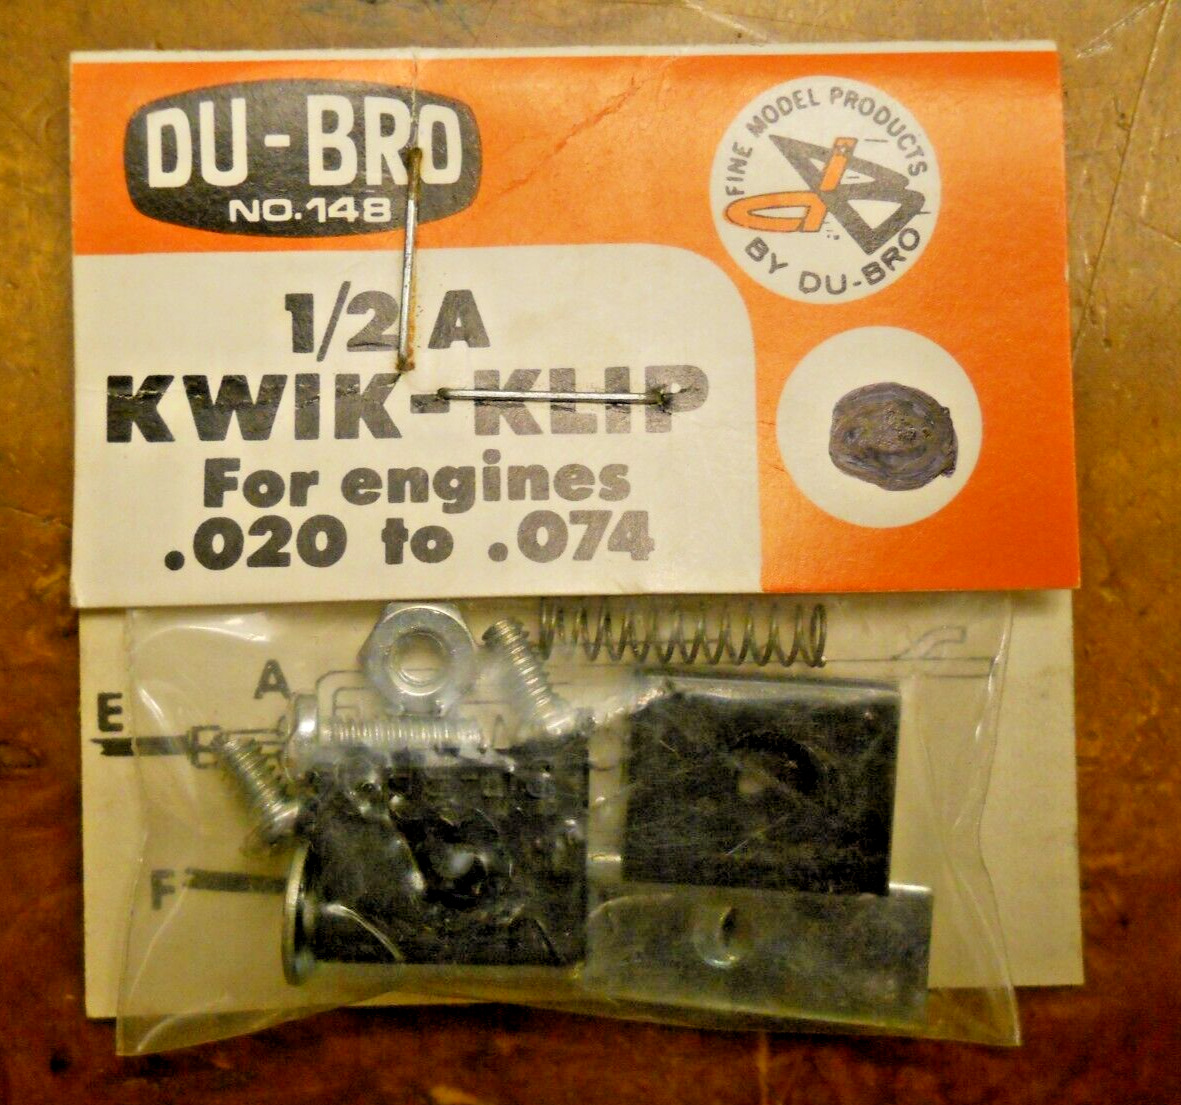 DUBRO #148 1/2A KWIK-KLIP GLOW PLUG CLIP FOR .020 TO .074 MODEL ENGINES (NEW)